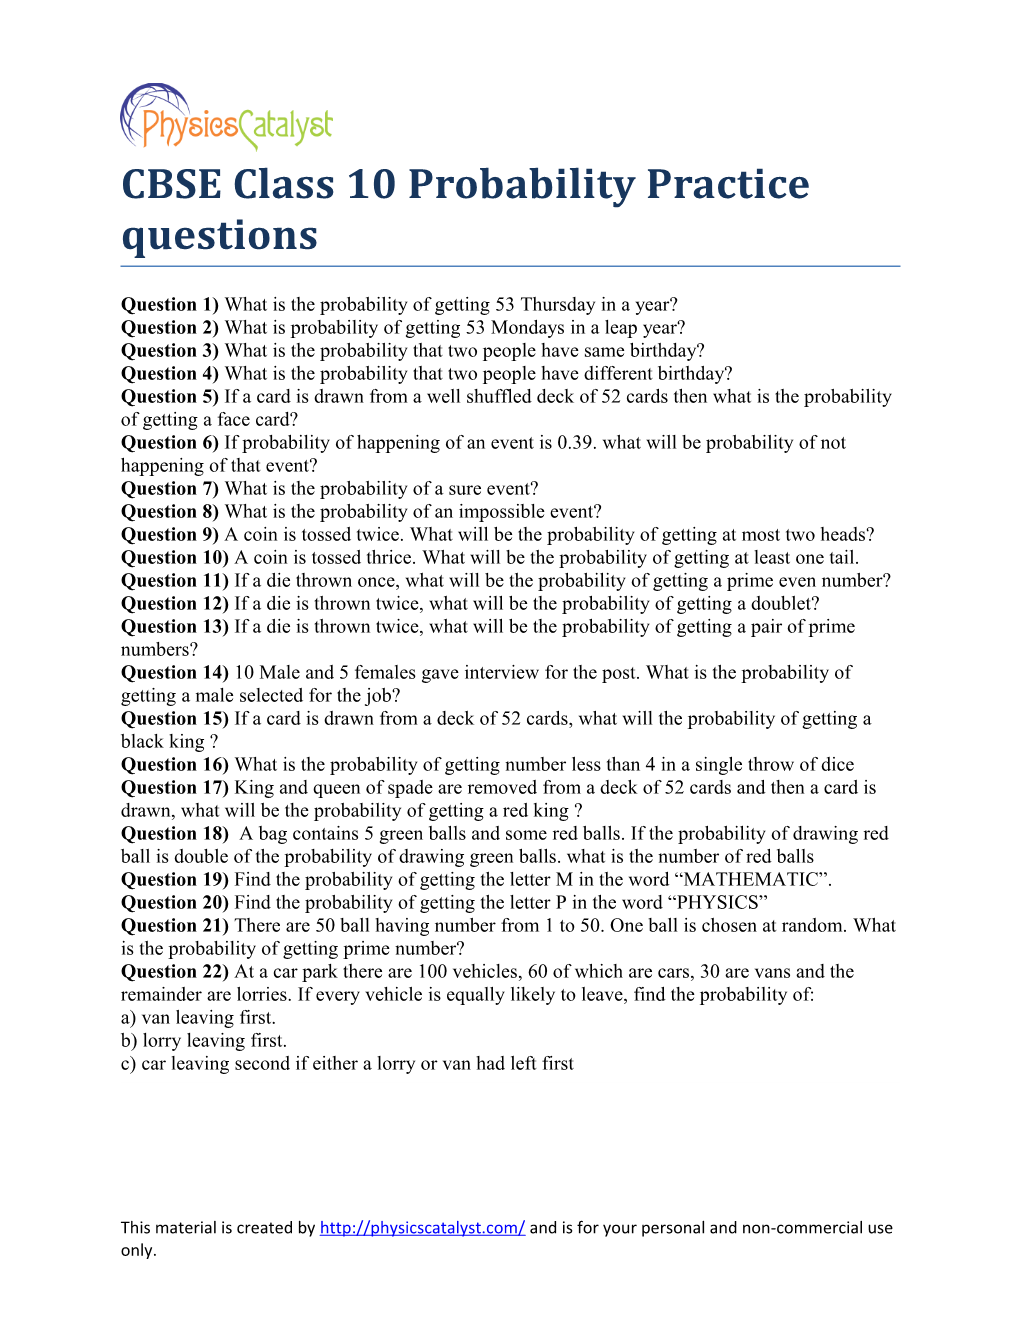 CBSE Class 10 Probability Practice Questions